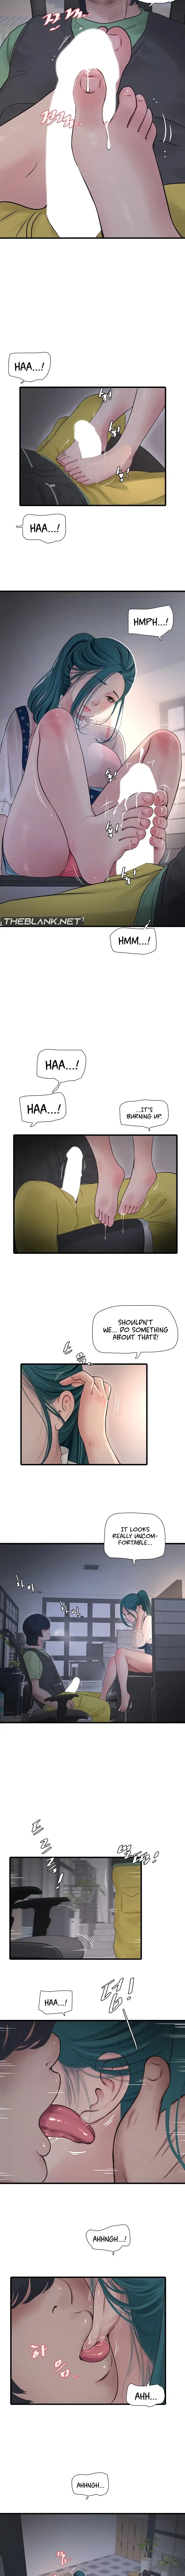 the-hole-diary-chap-33-4